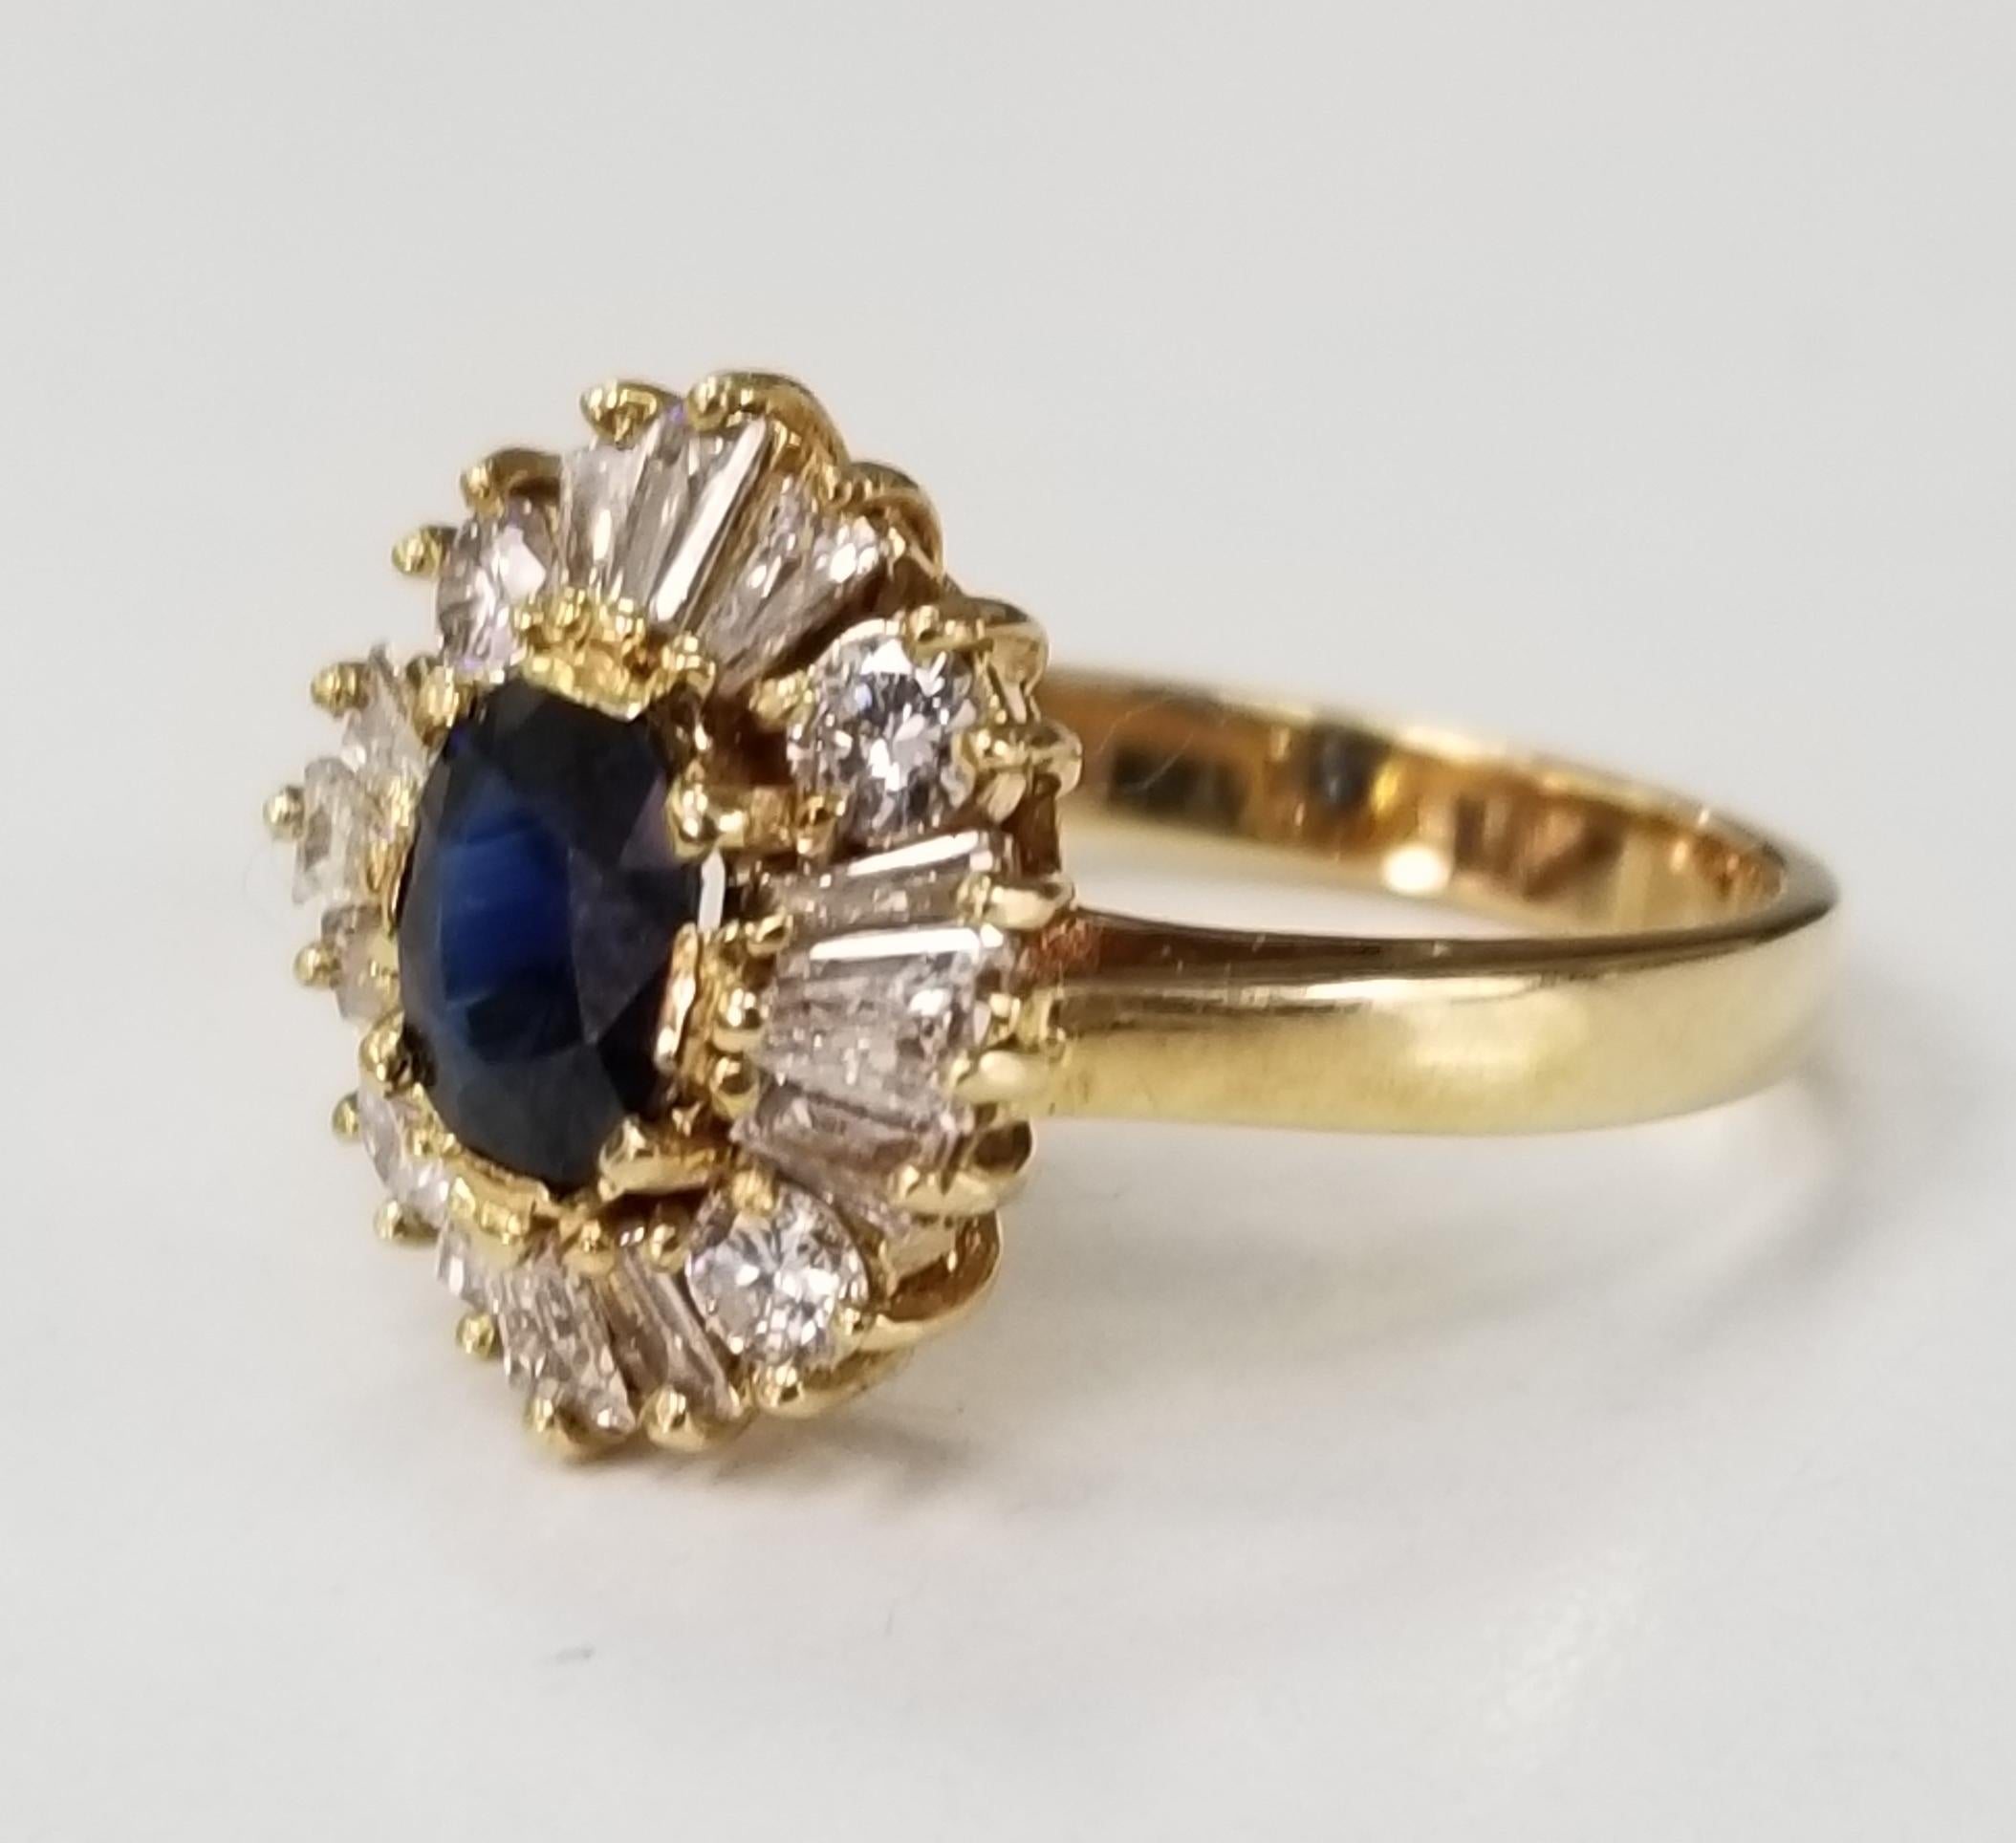 14l yellow gold sapphire and diamond ring, containing 1 oval sapphire of gem quality weighing 1.00cts. and 4 round diamonds weighing .30pts. and 12 baguette cut diamonds weighing .56pts.  This ring is a size 5.5 but we will size to fit for free.